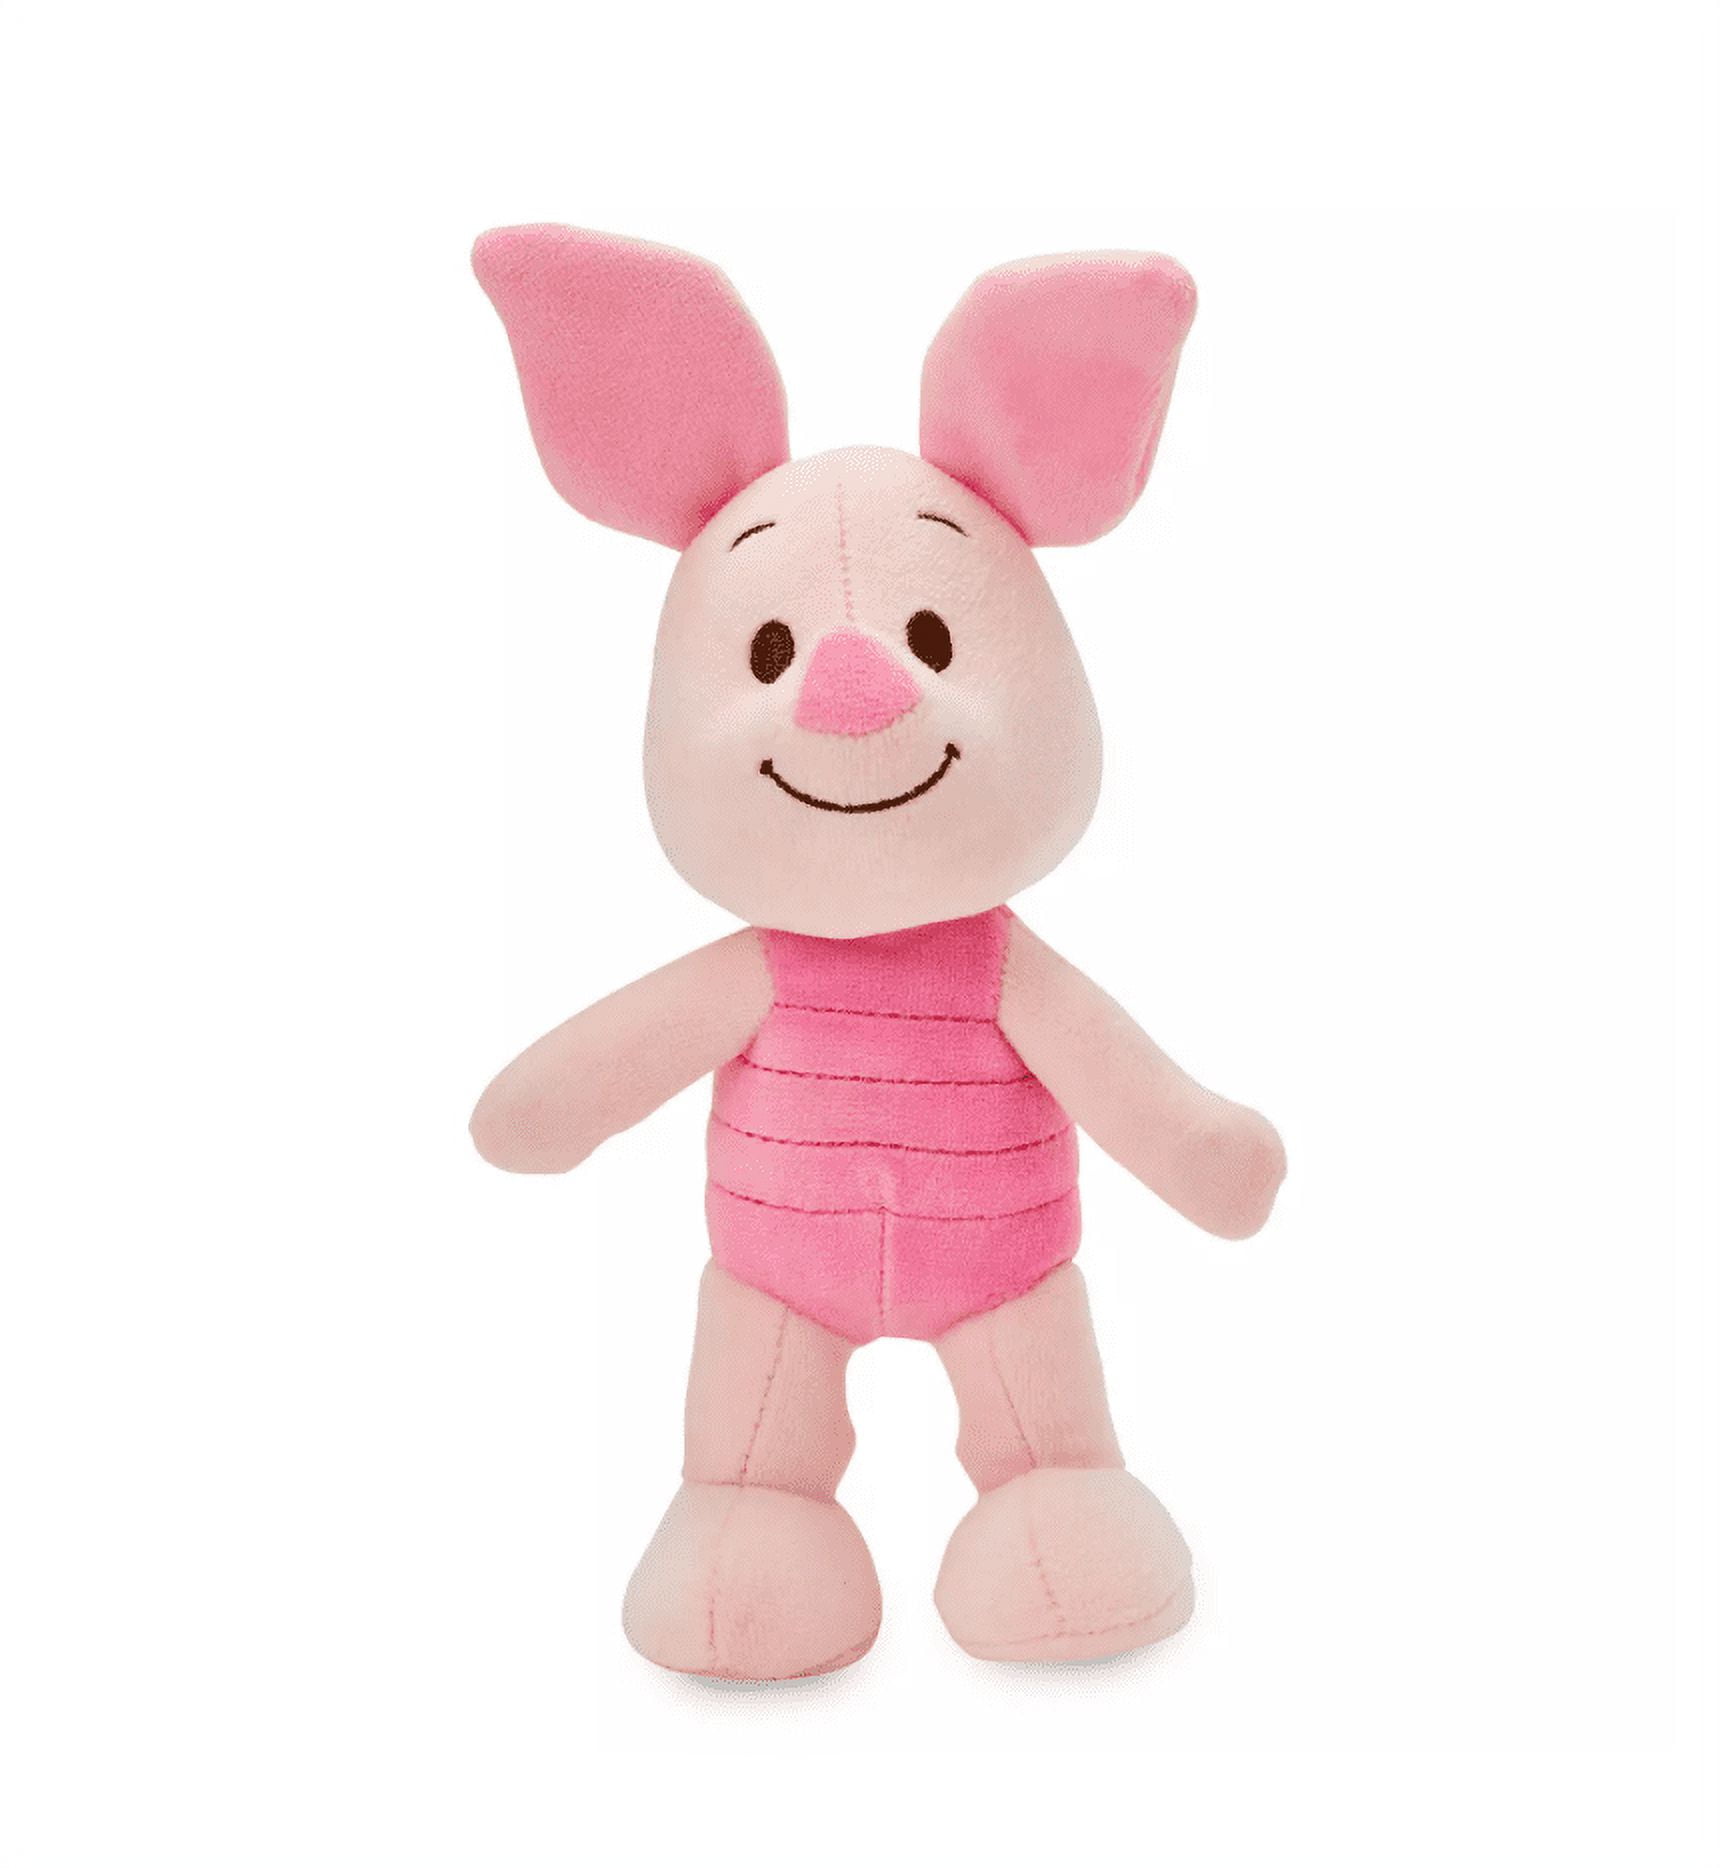 Disney NuiMOs Collection Piglet Poseable Plush New with Tag